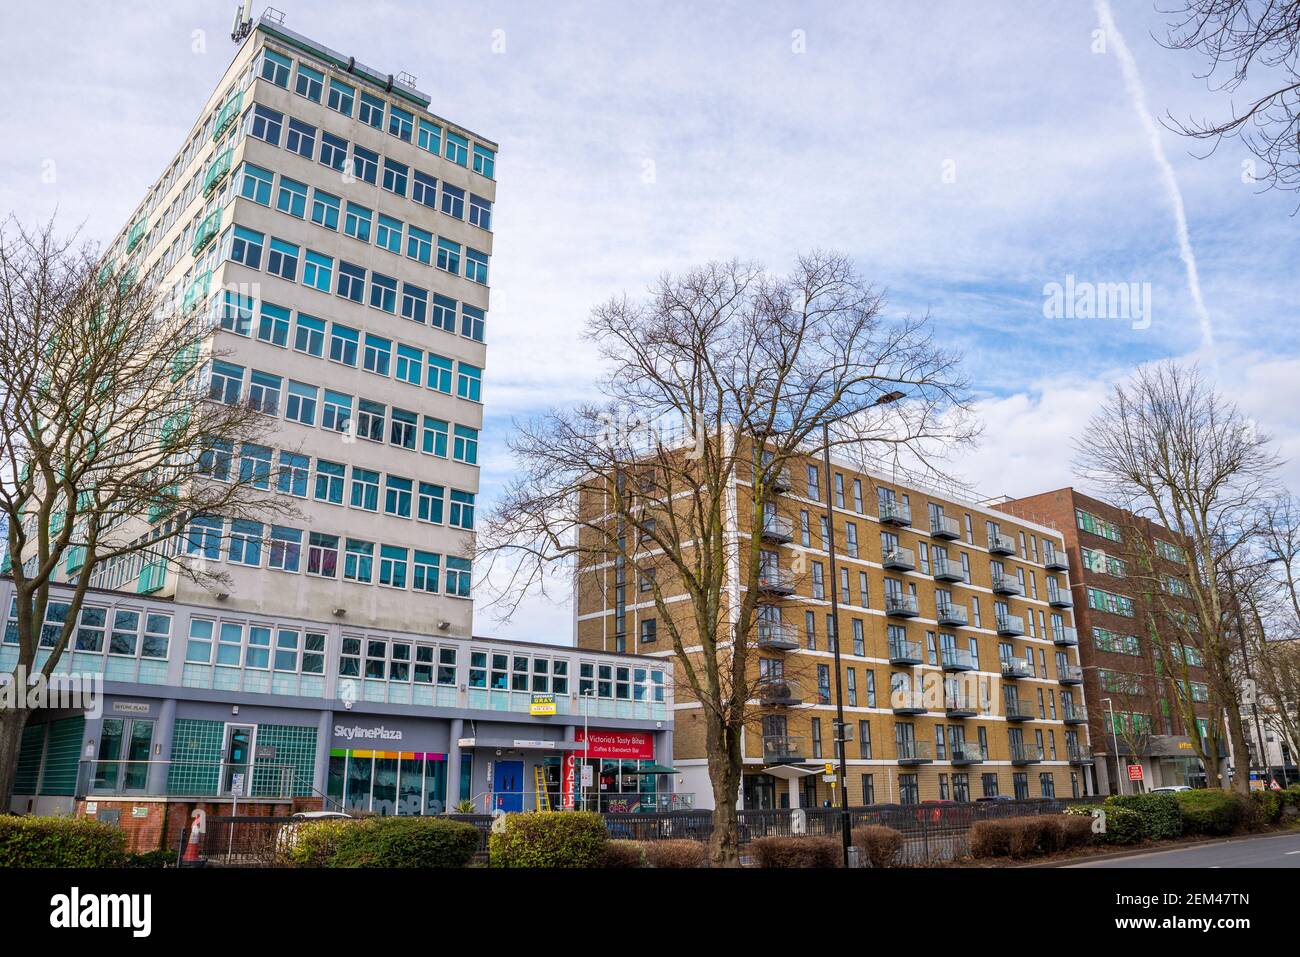 Skyline Plaza apartments, block of flats. Tower block in Victoria Avenue, Southend on Sea, Essex, UK. Space for copy Stock Photo